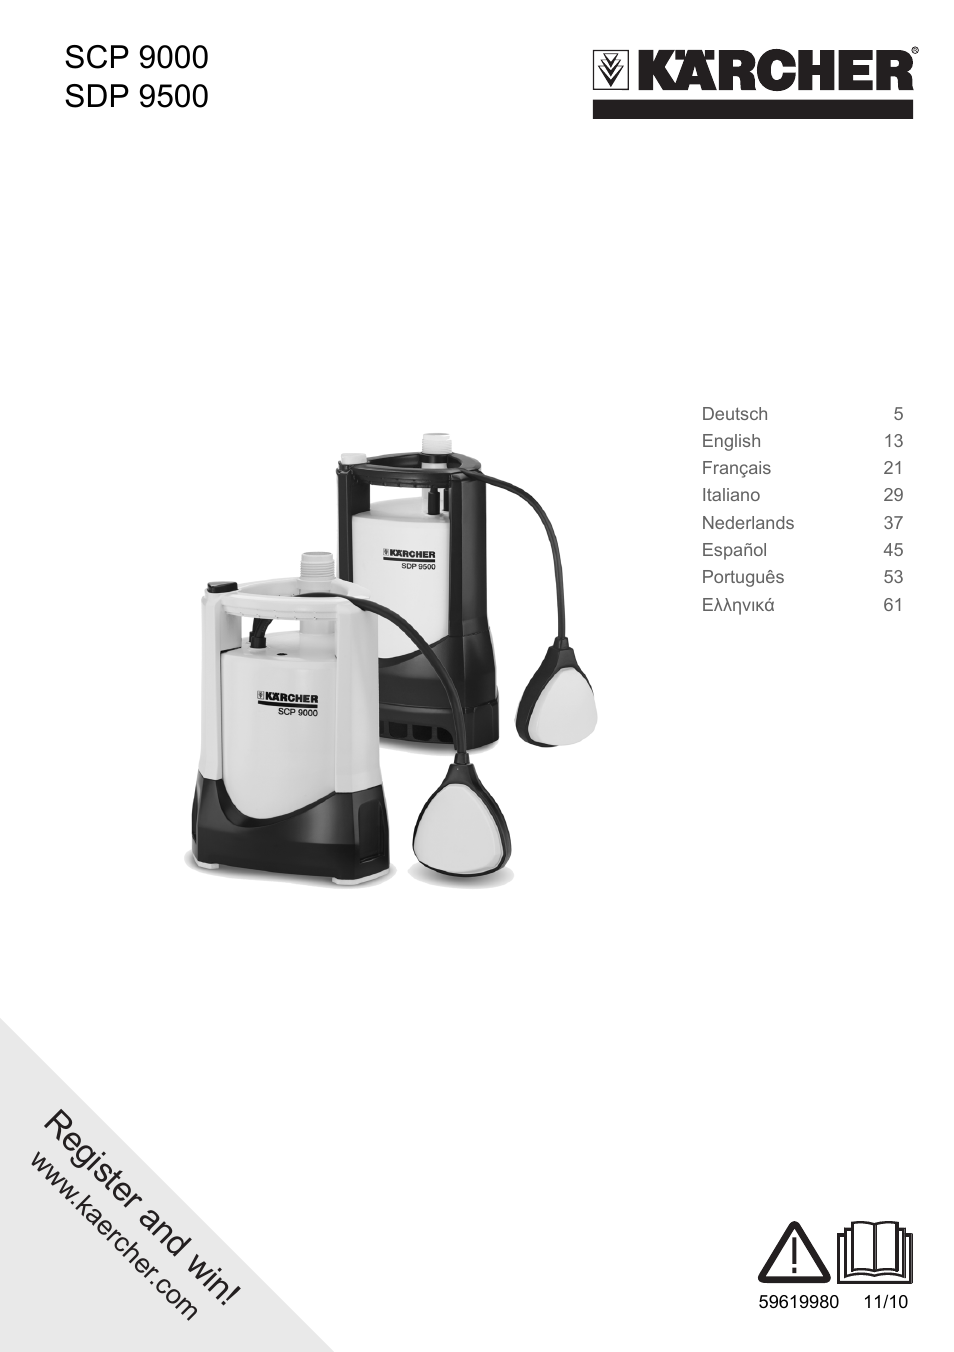 Karcher SDP 9500 User Manual | 72 pages | Also for: SCP 9000